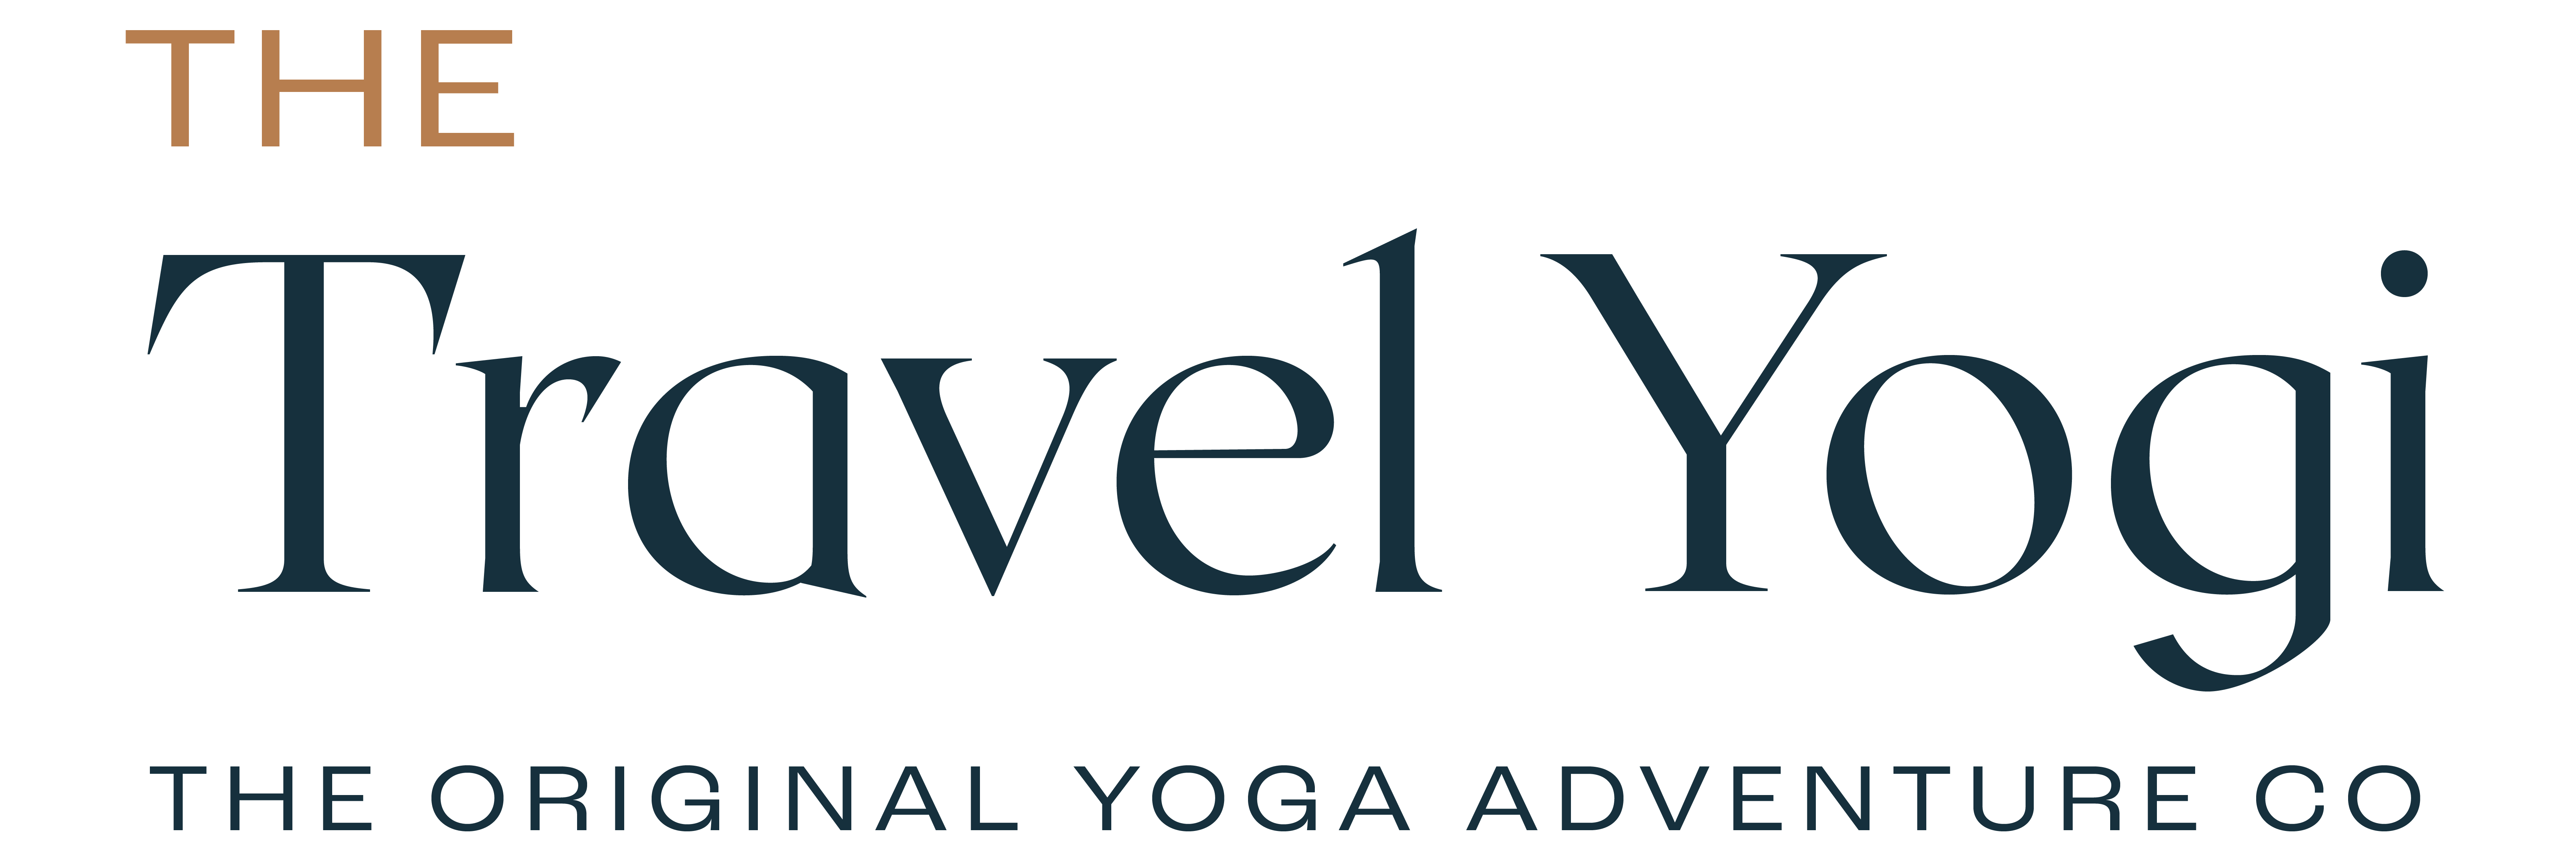 8 Days Living Fully and Authentically Yoga Retreat with Dana